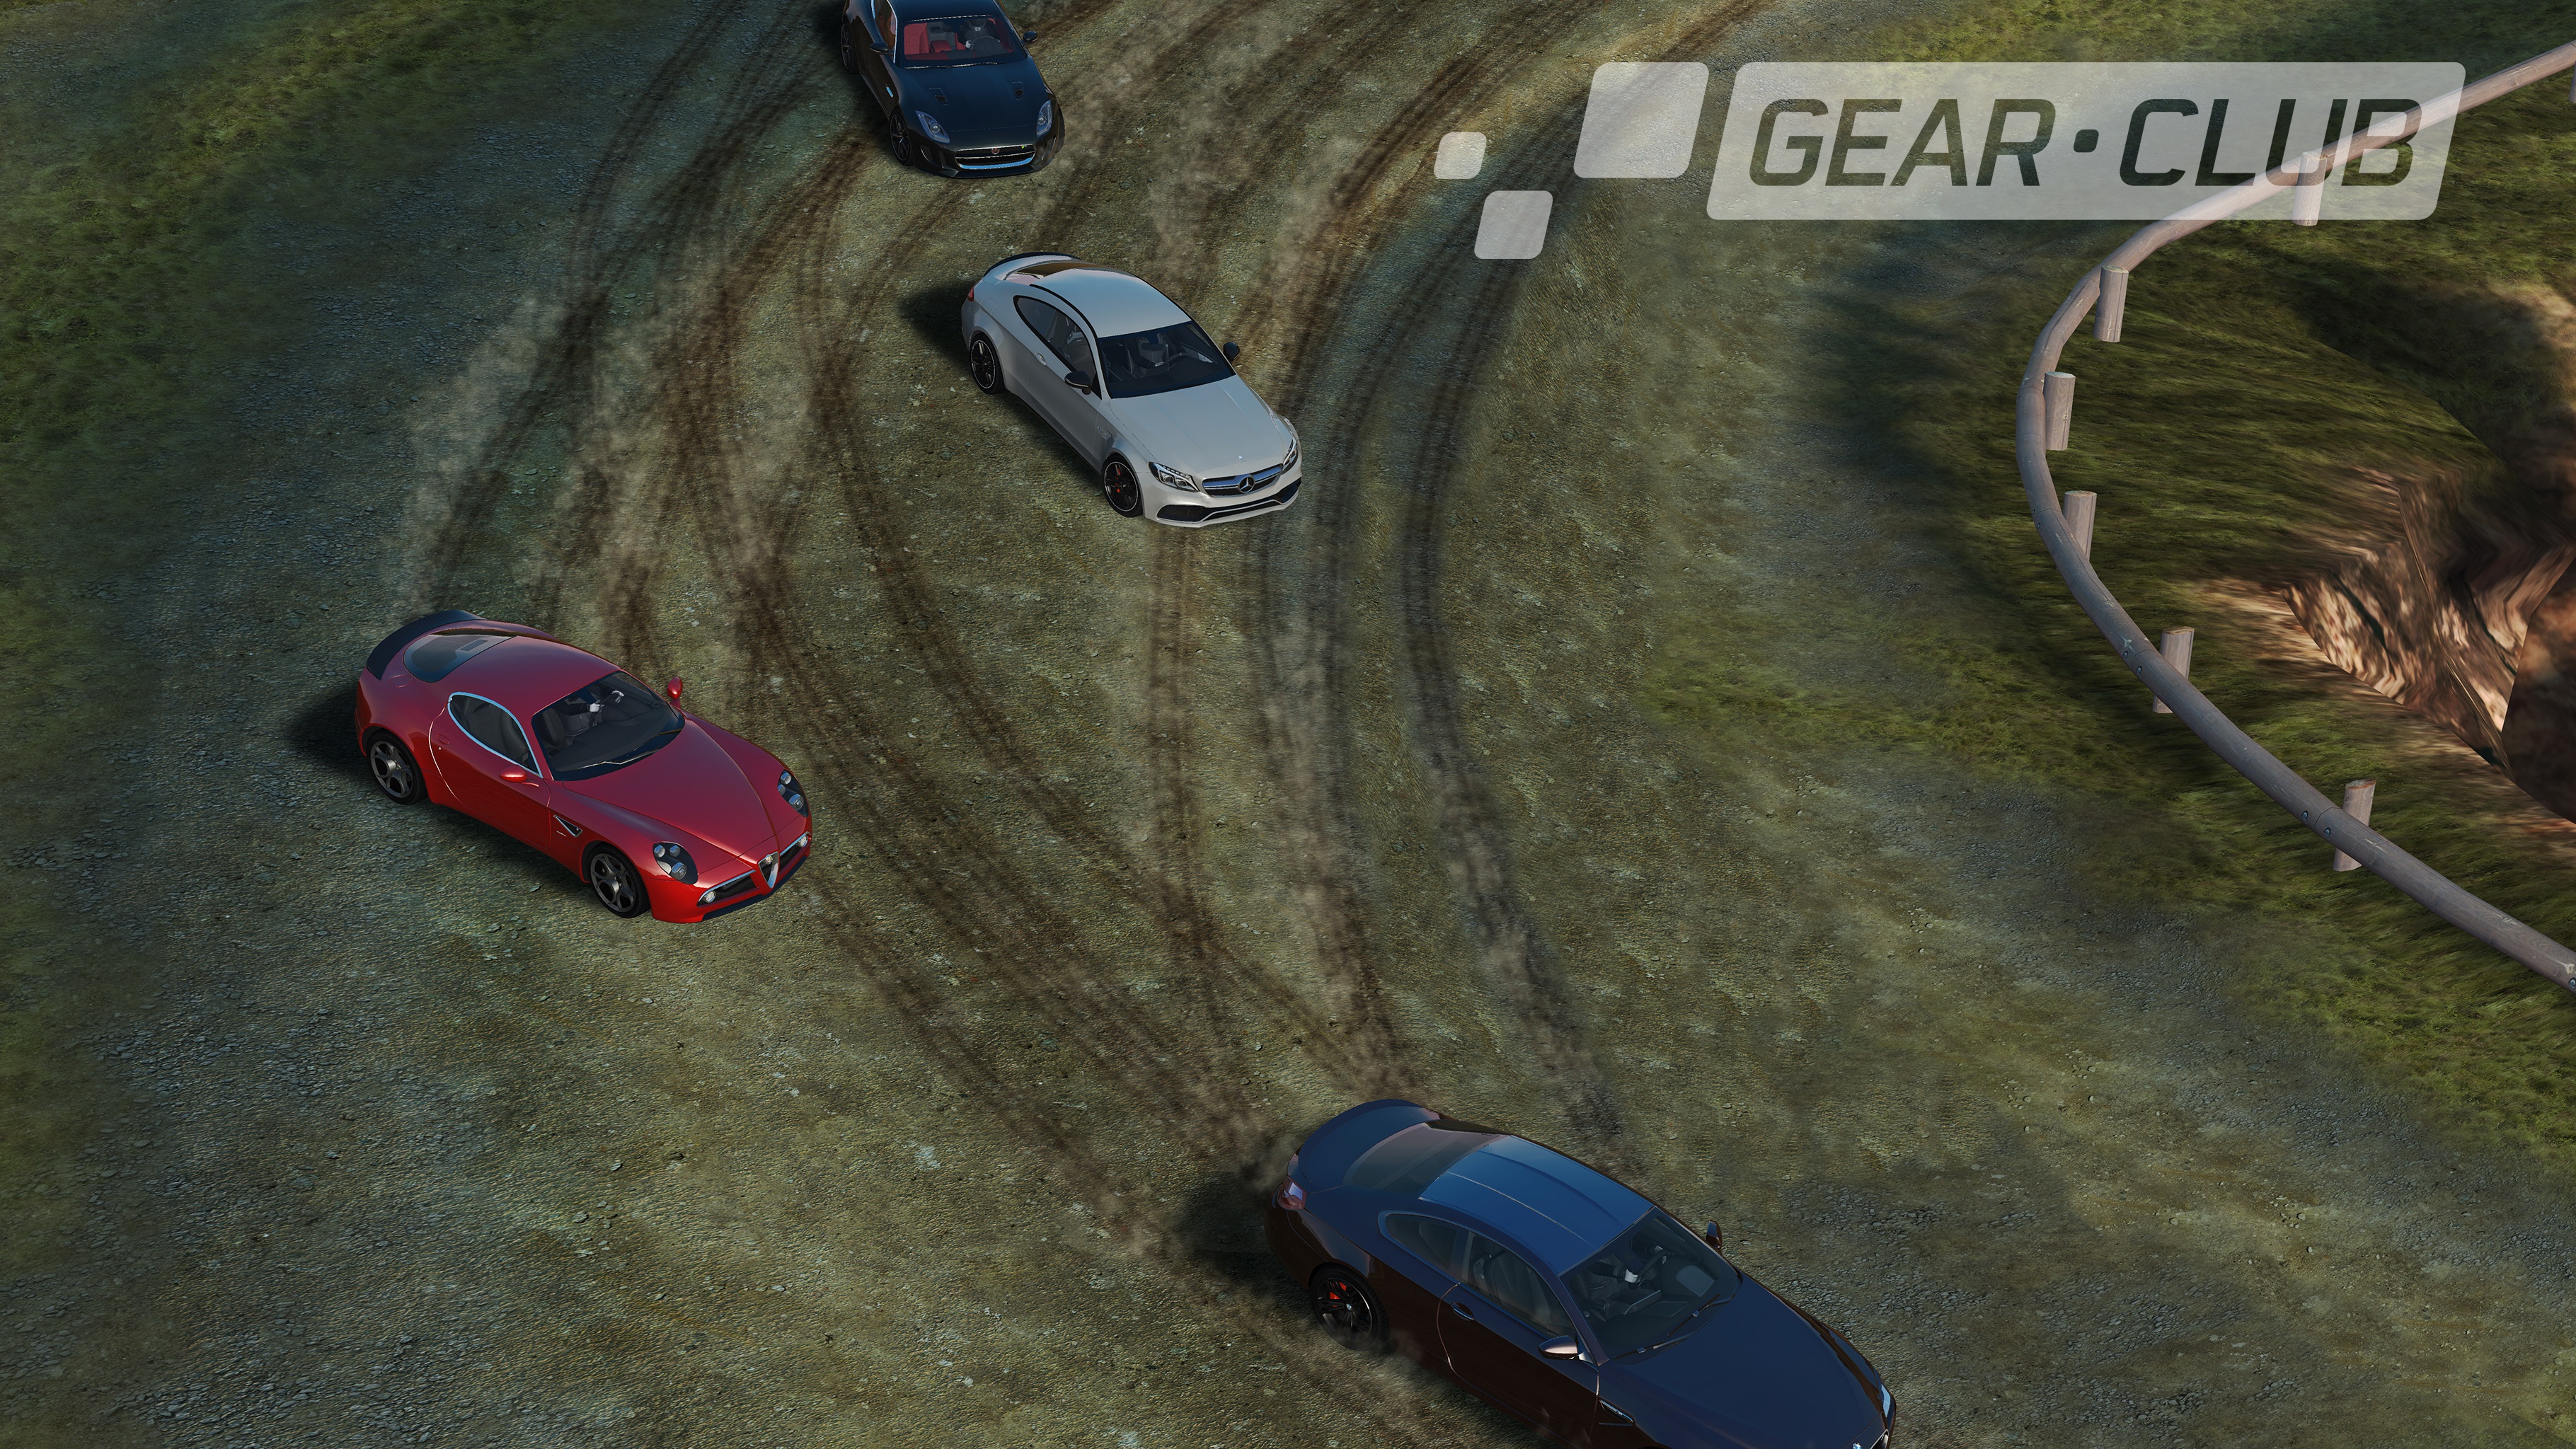 Rally Racing Car Drift::Appstore for Android